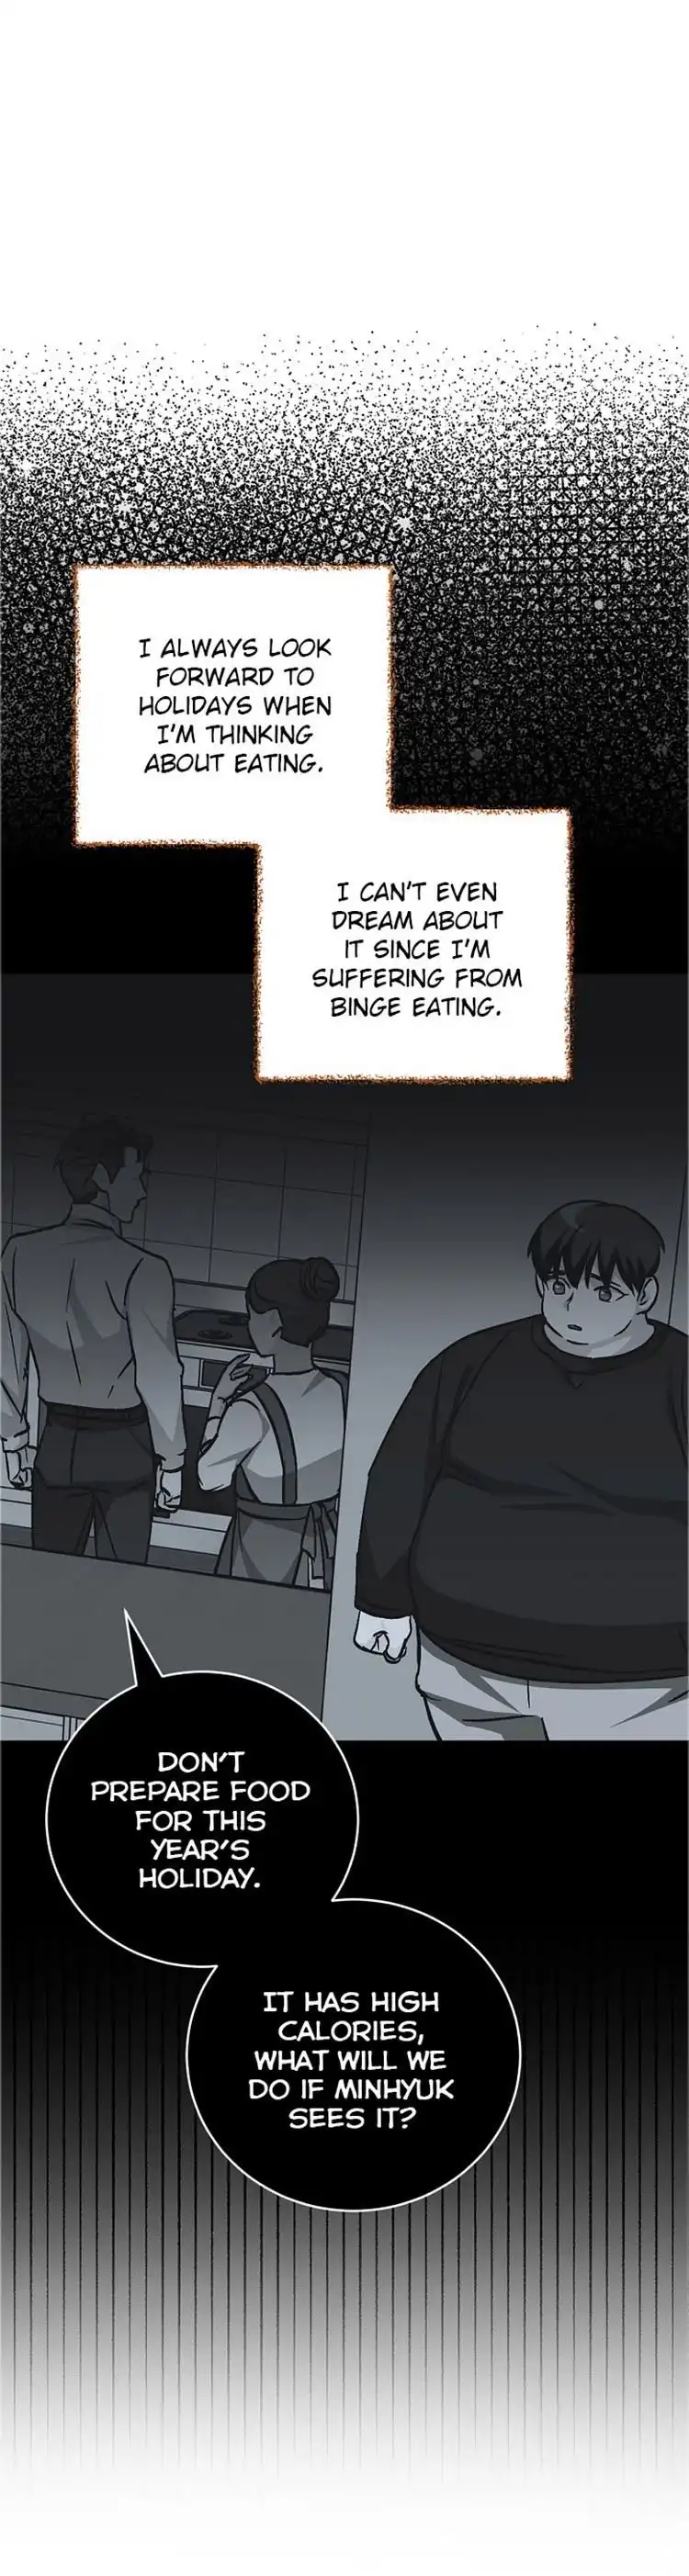 Leveling Up, By Only Eating! Chapter 35